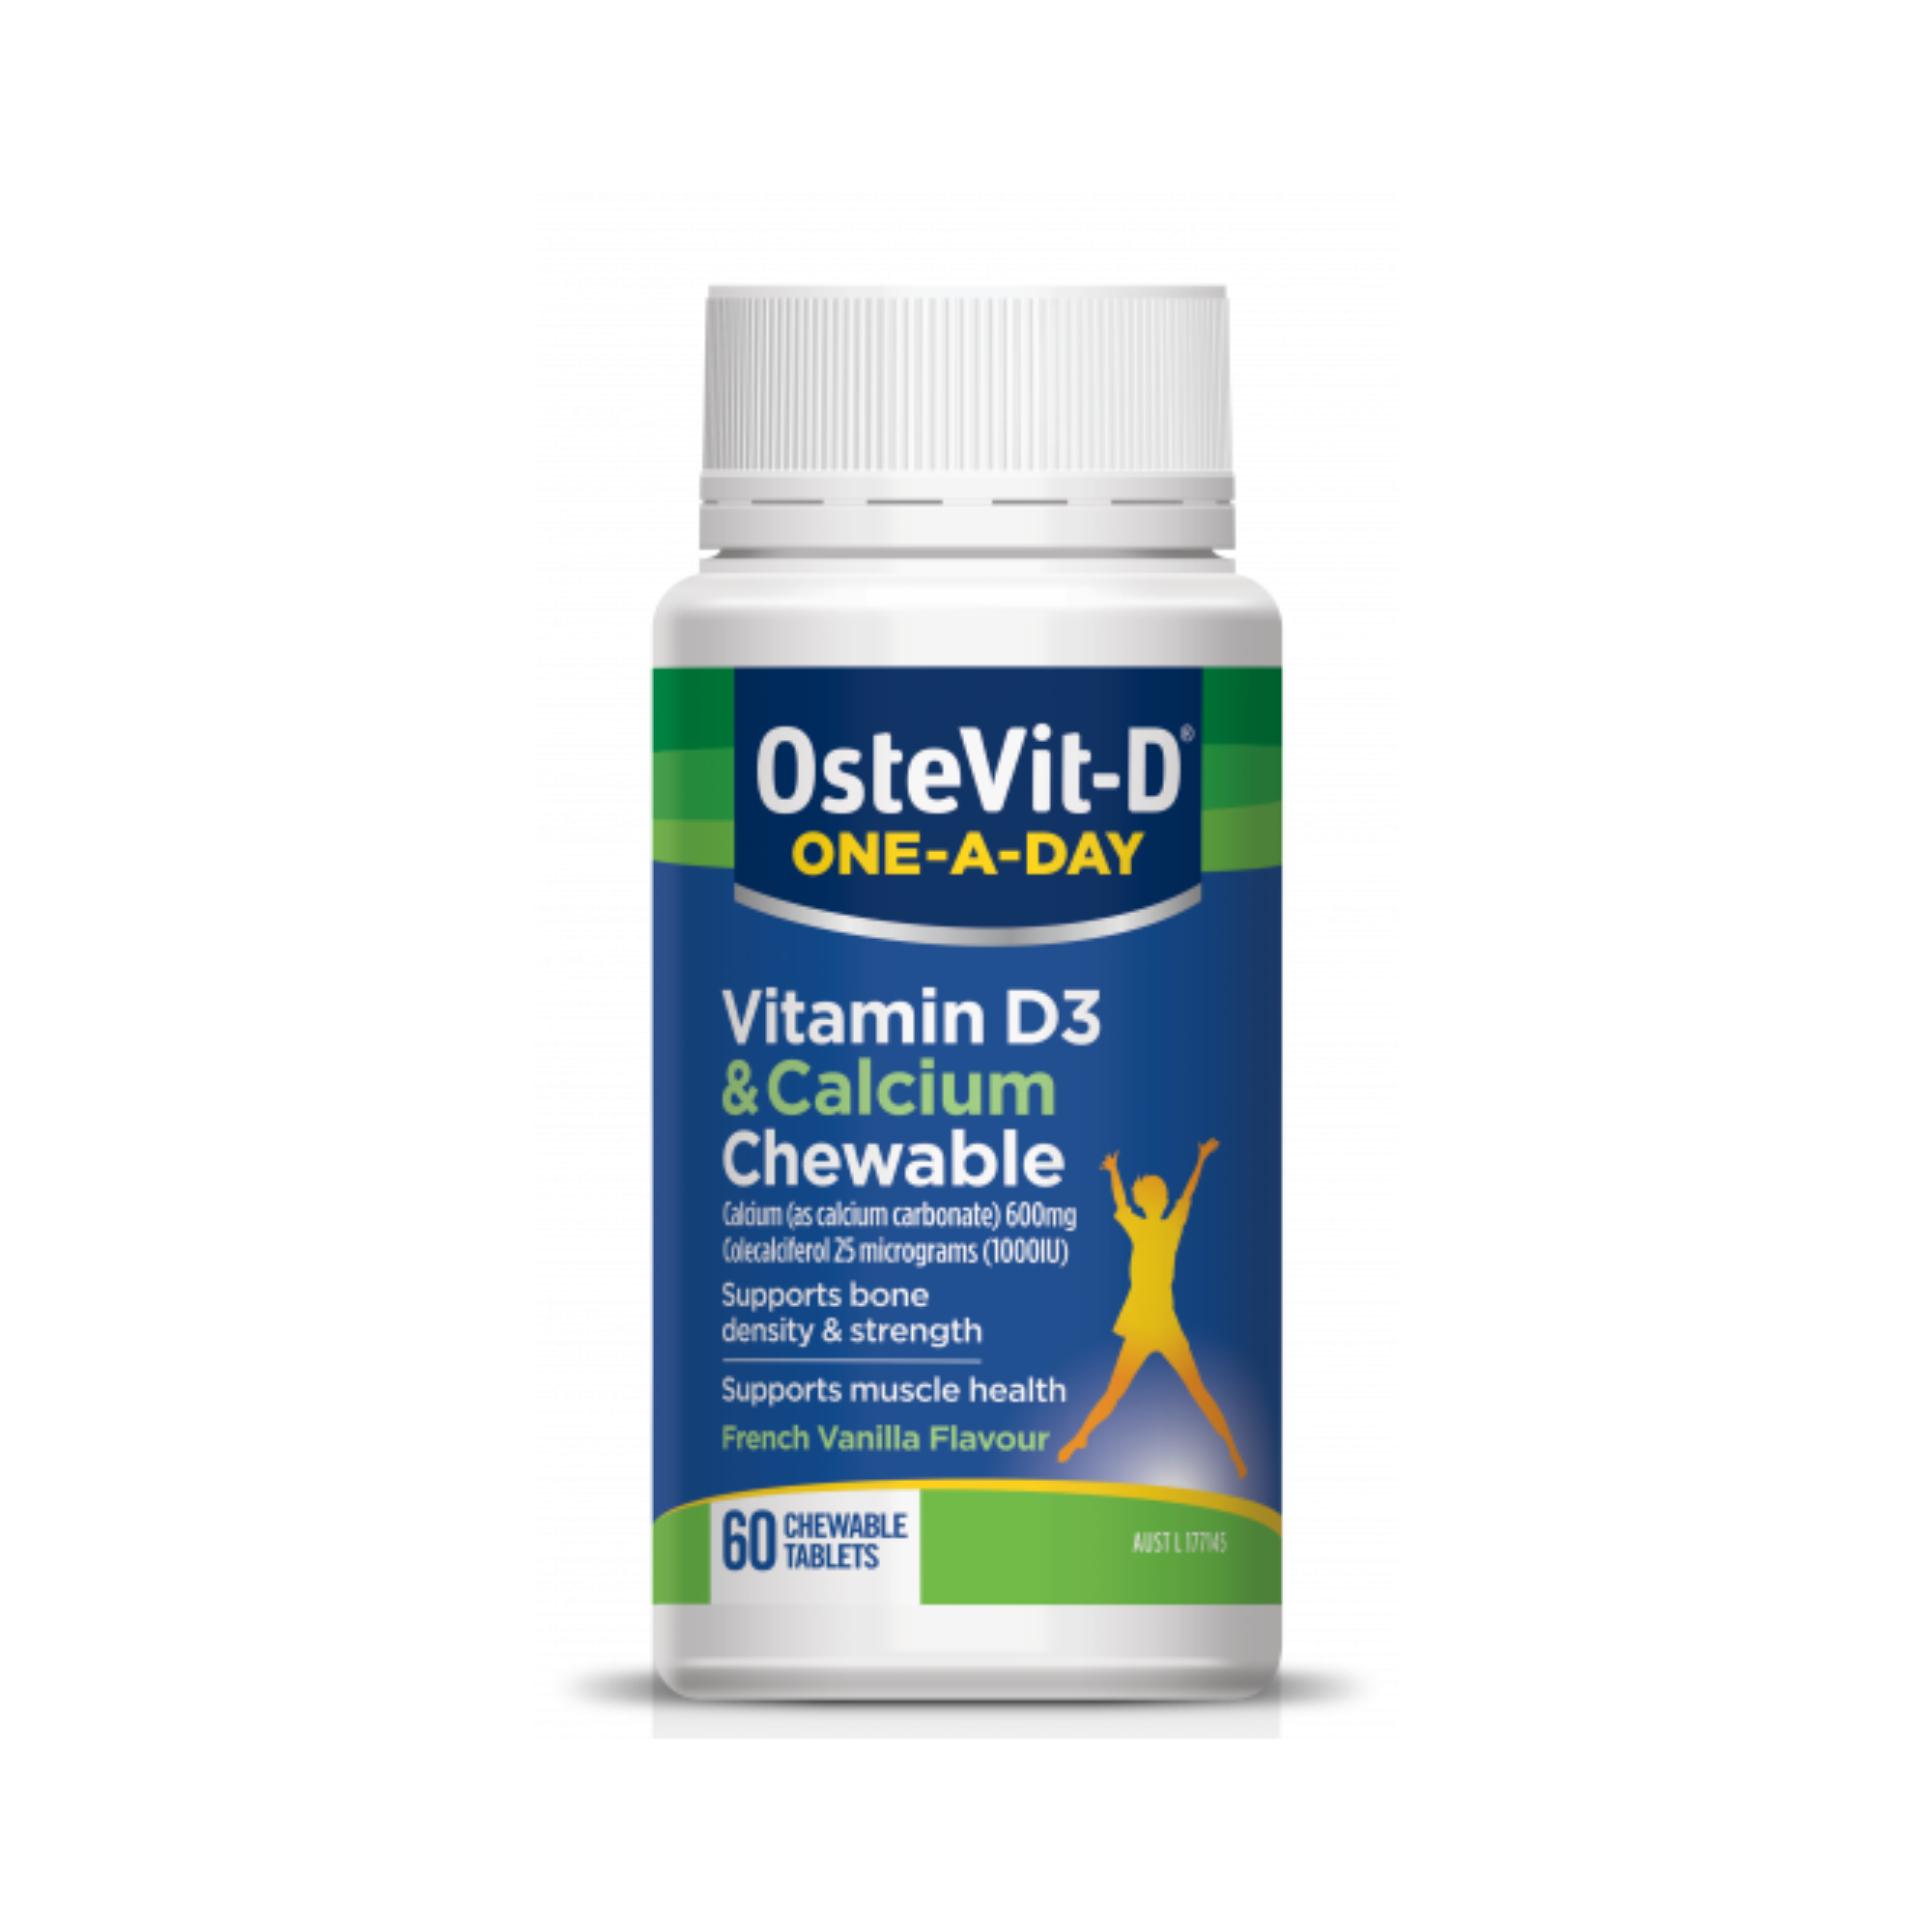 OsteVit-D One-A-Day Vitamin D3 & Calcium  60 Chewable Tablets